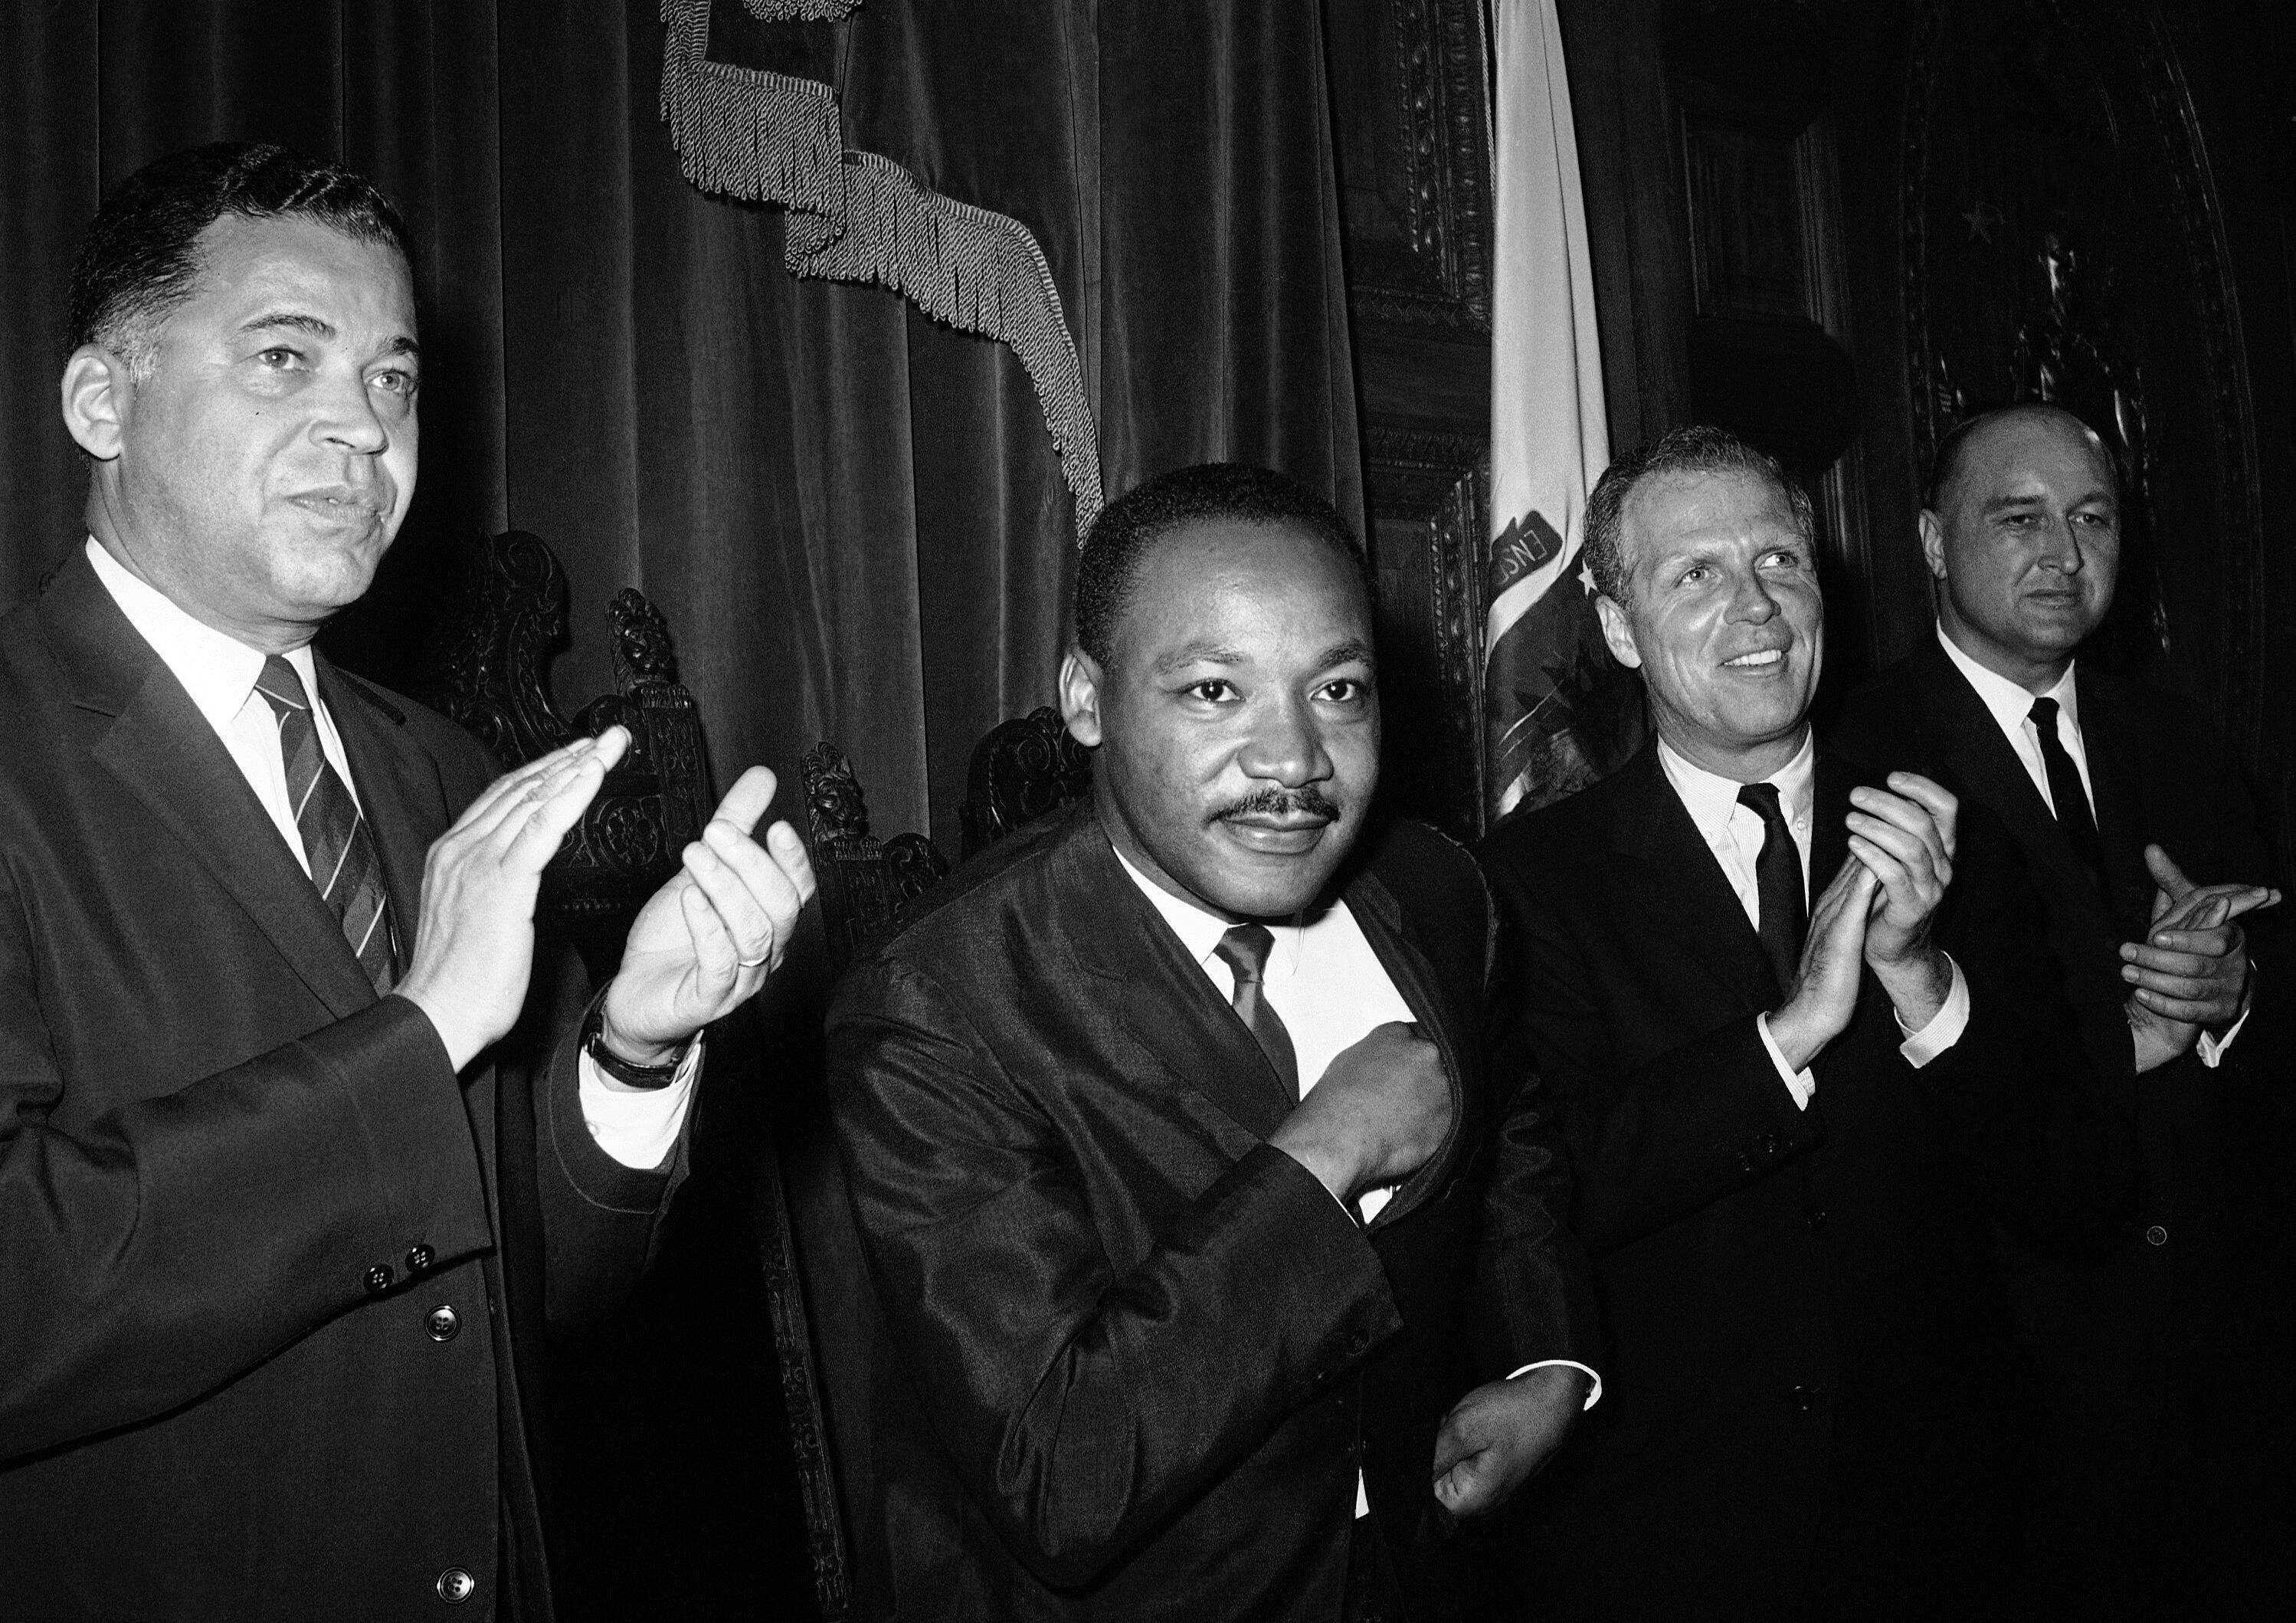 Dr. Martin Luther King Jr., as he sits down following his speech to the joint session of the Massachusetts Legislature in Boston, April 22, 1965. Applauding at left is Massachusetts Attorney Gen. Edward W. Brooke. King will lead a civil rights march to Boston Common. Others are unidentified. (AP Photo)